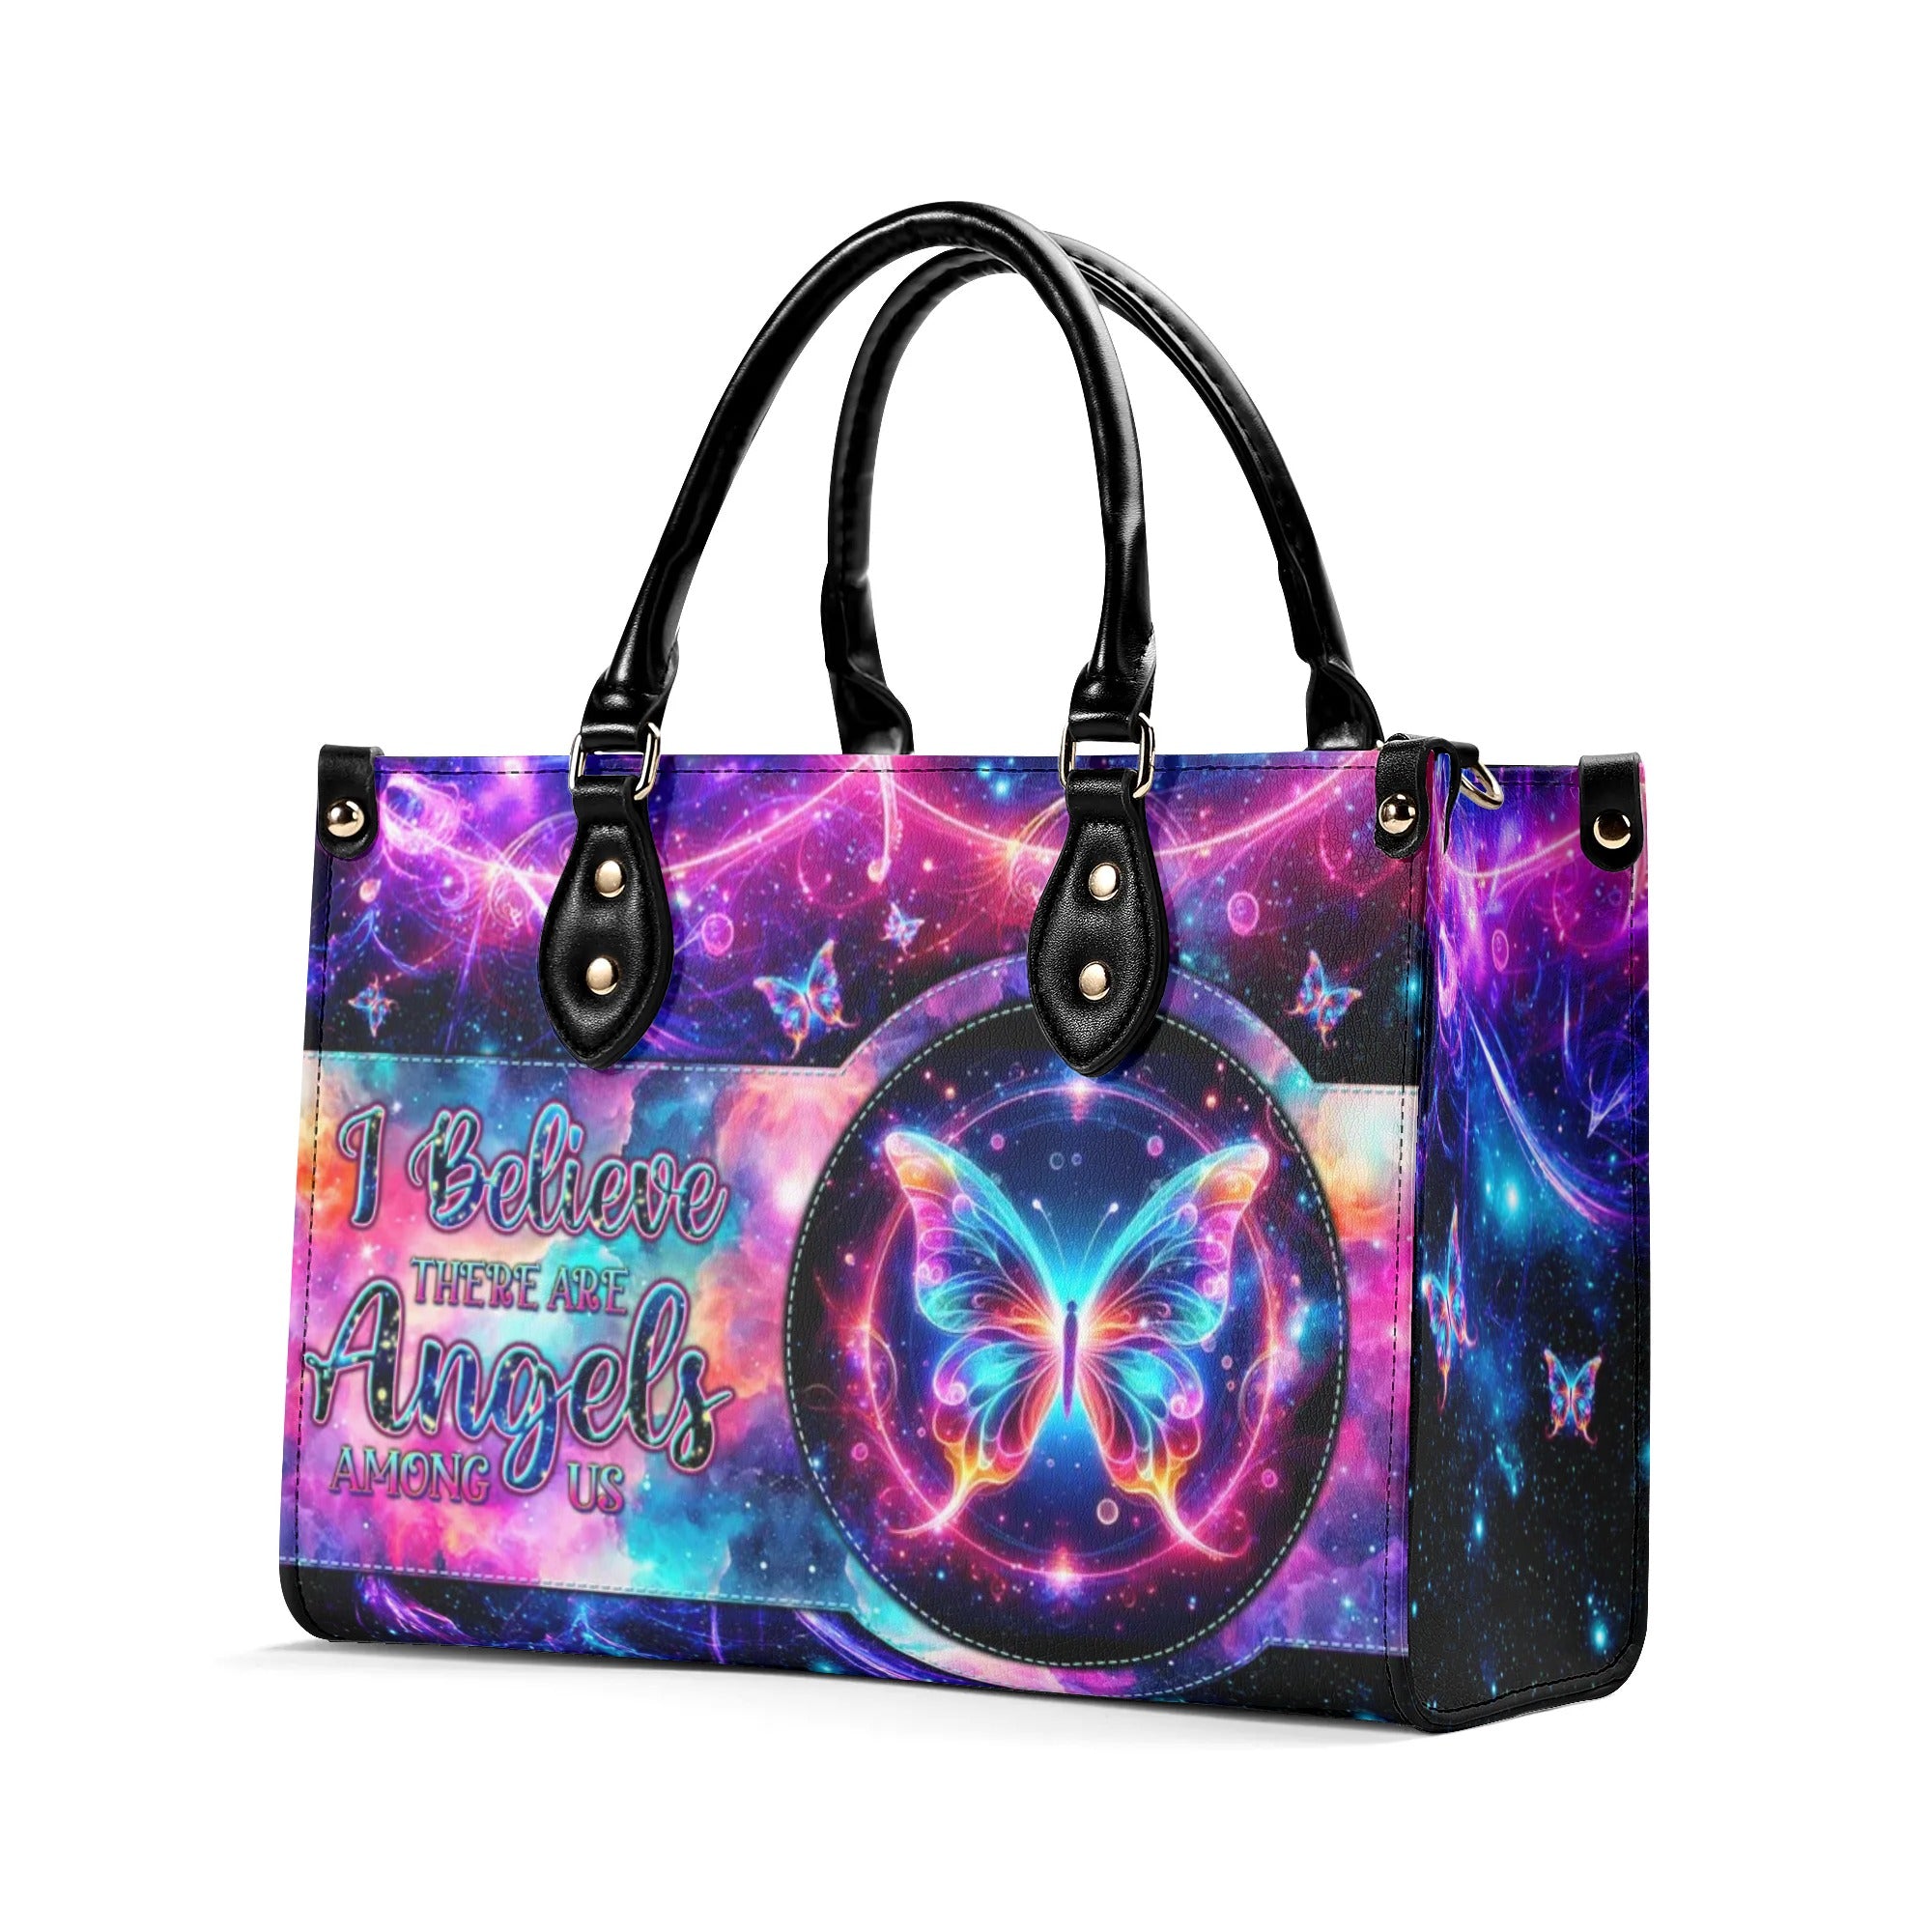 I BELIEVE THERE ARE ANGELS AMONG US BUTTERFLY LEATHER HANDBAG - TLTW0406245